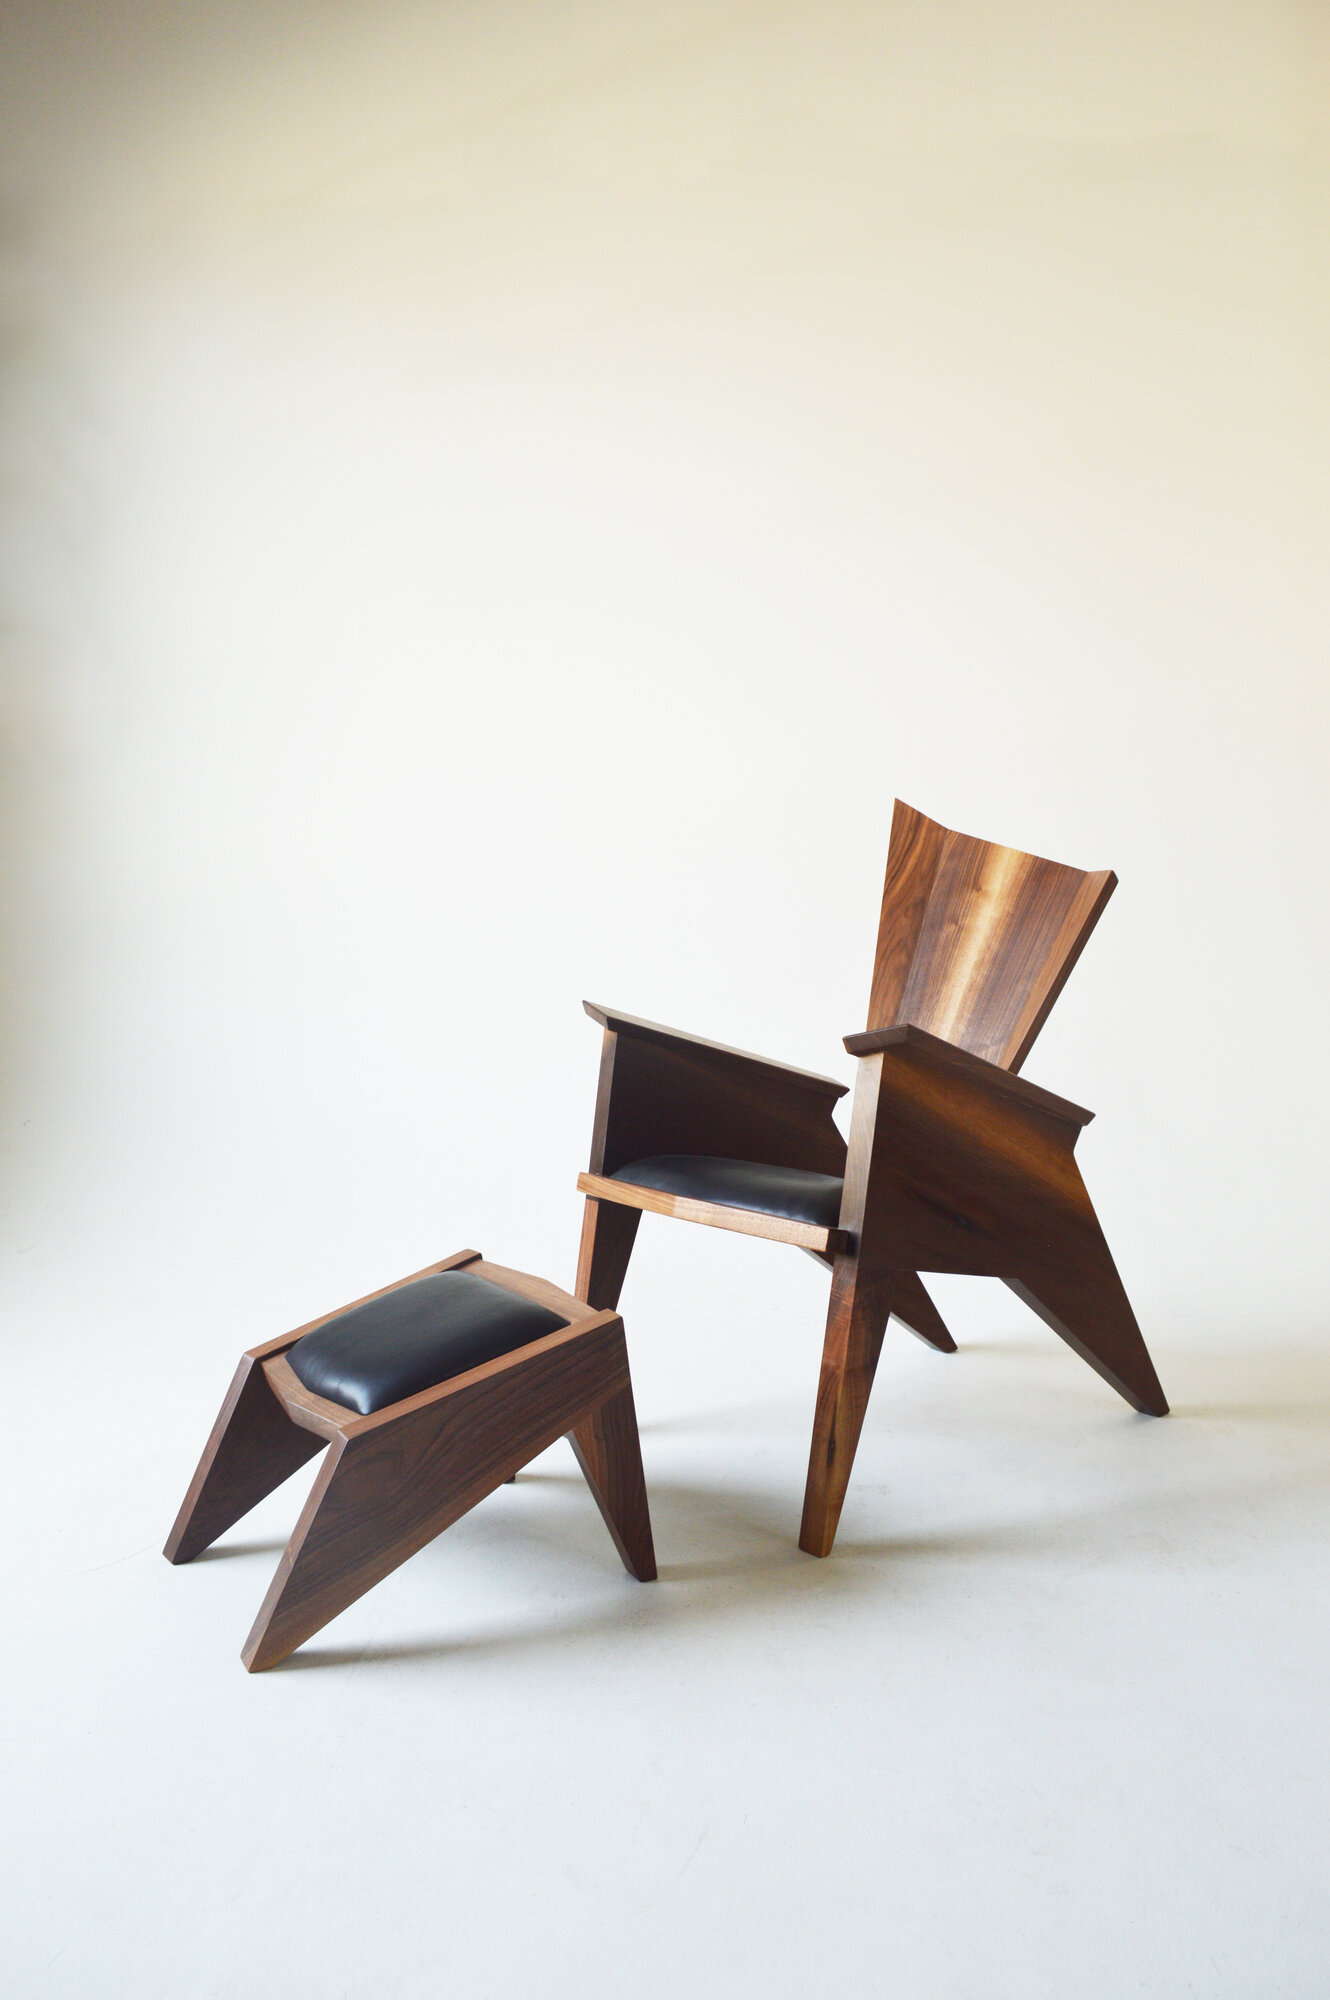 Chair No. 2